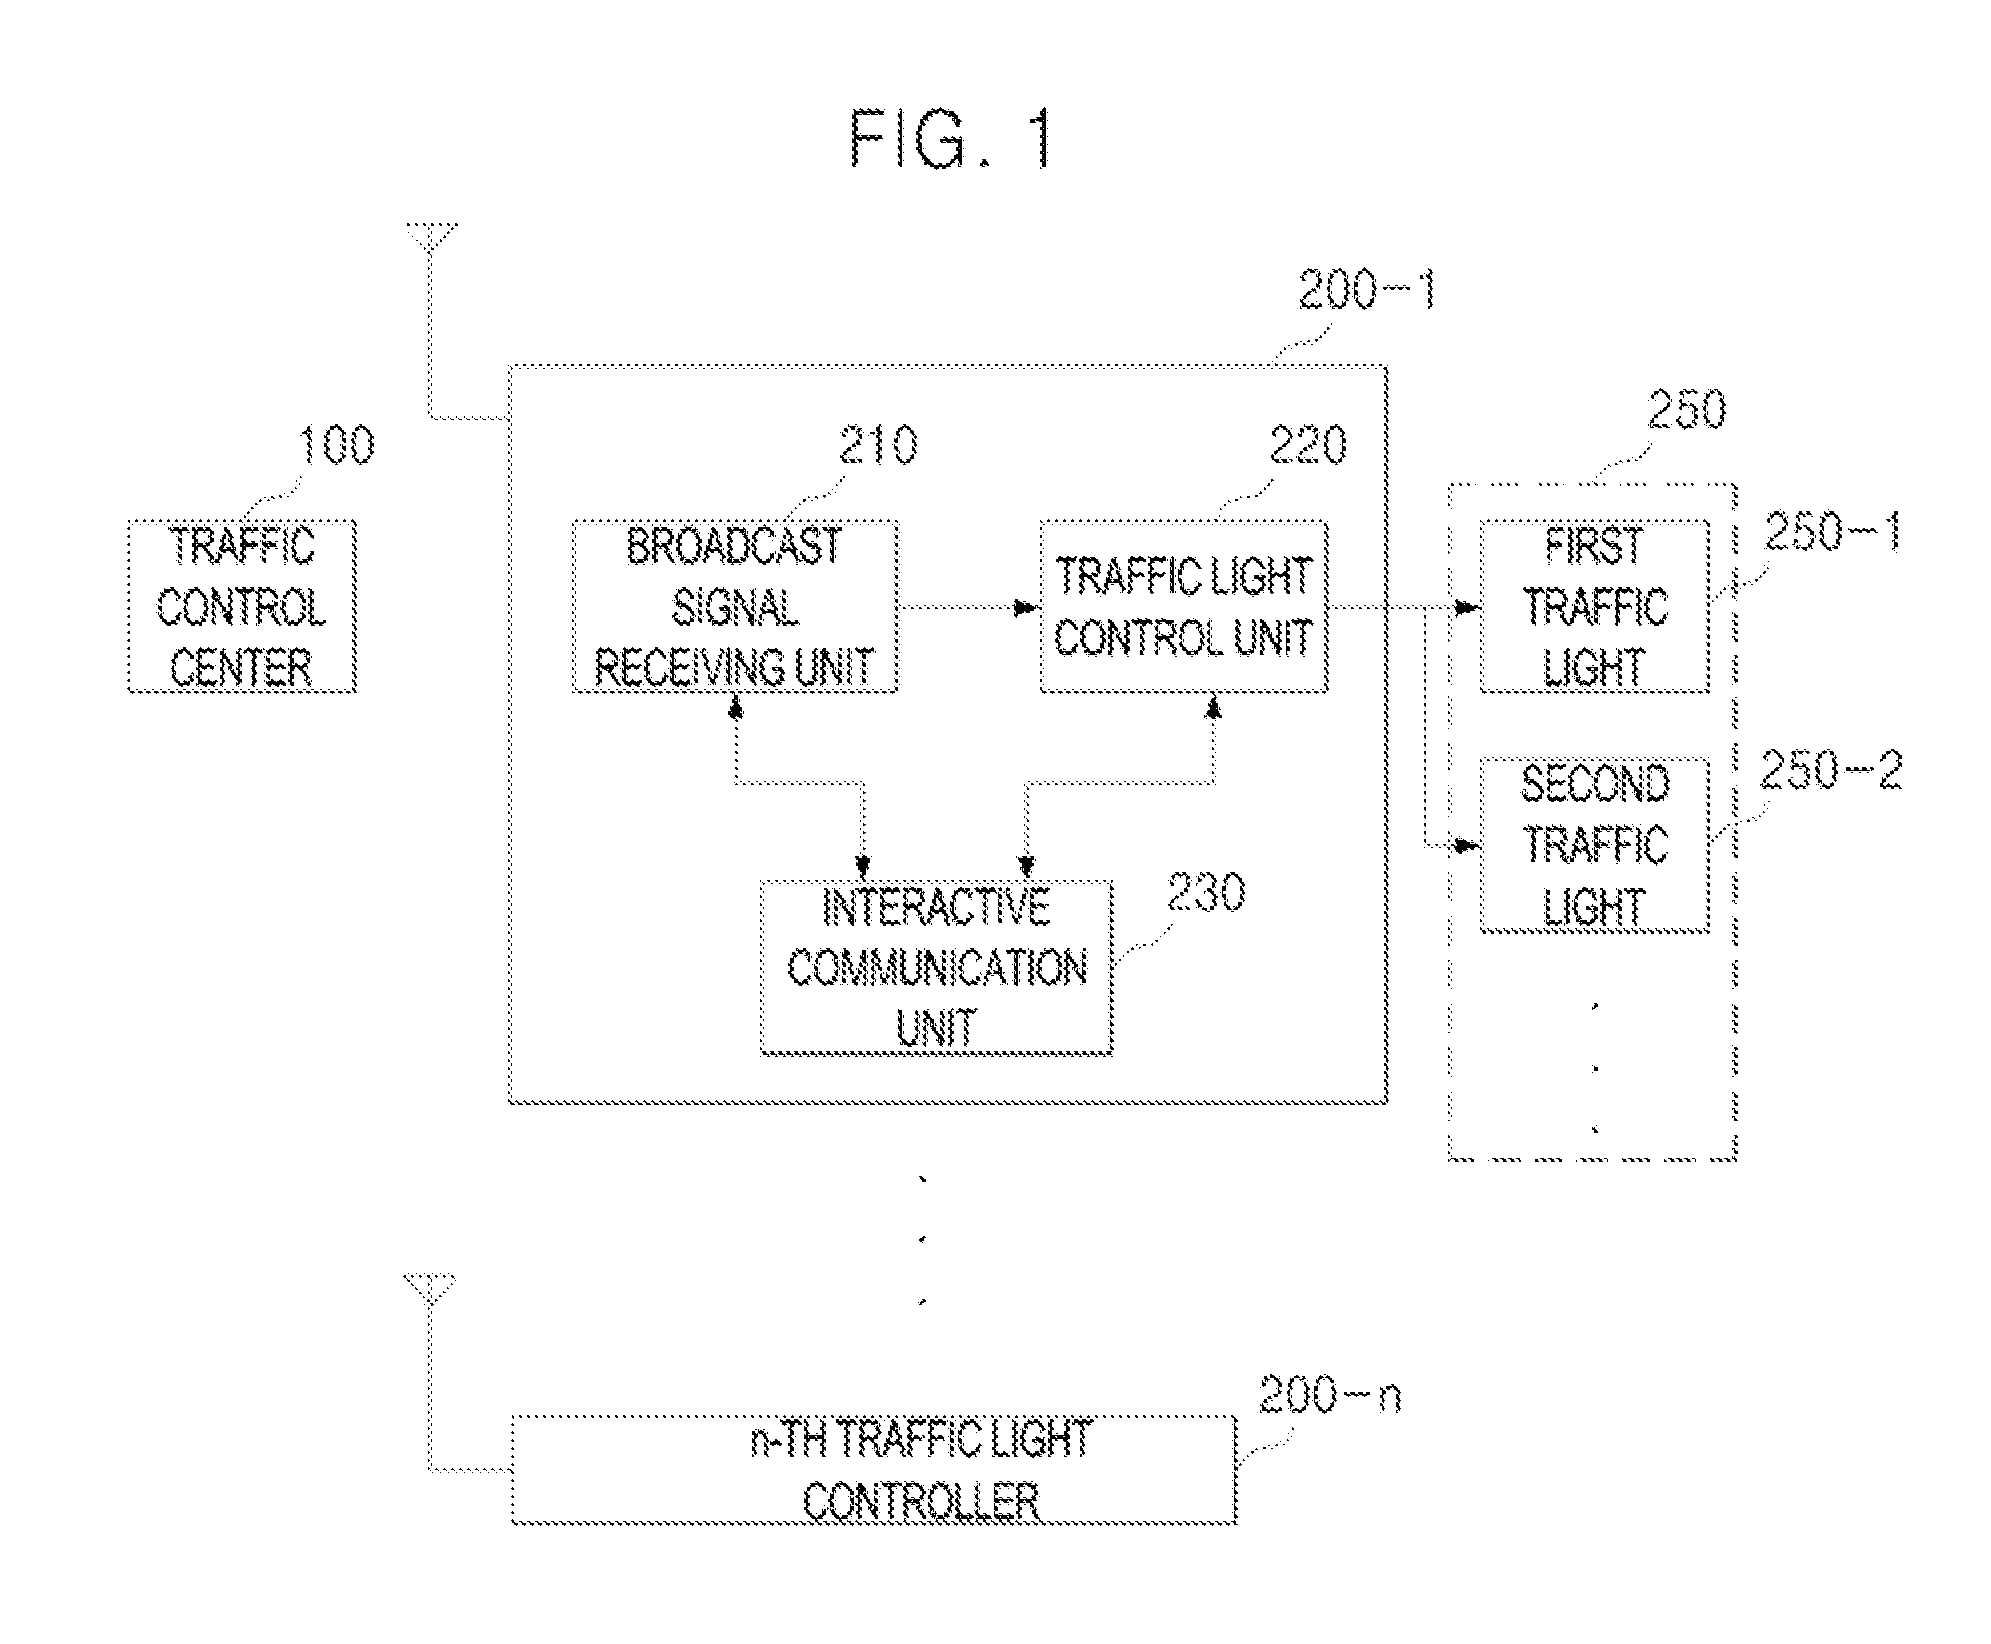 Apparatus and method for controlling traffic signals using identification information having hierarchical structure